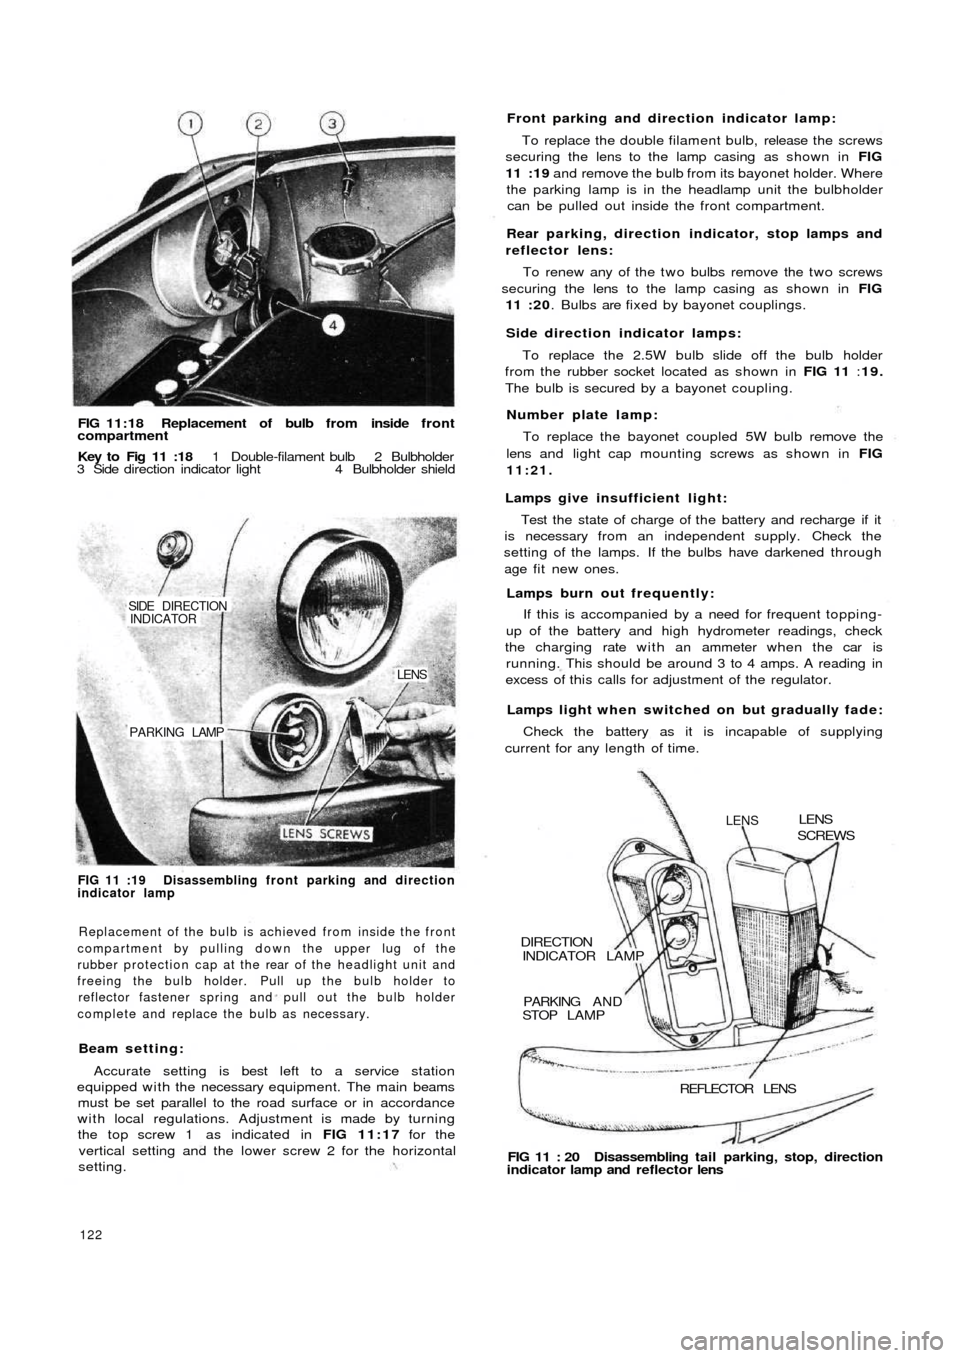 FIAT 500 1966 1.G Workshop Manual FIG 11:18 Replacement of bulb from inside f r o n tcompartment
Key to  Fig 11 :18 1 Double-filament bulb 2 Bulbholder
3 Side direction indicator light 4 Bulbholder shield
PARKING LAMP
LENS
SIDE  DIREC